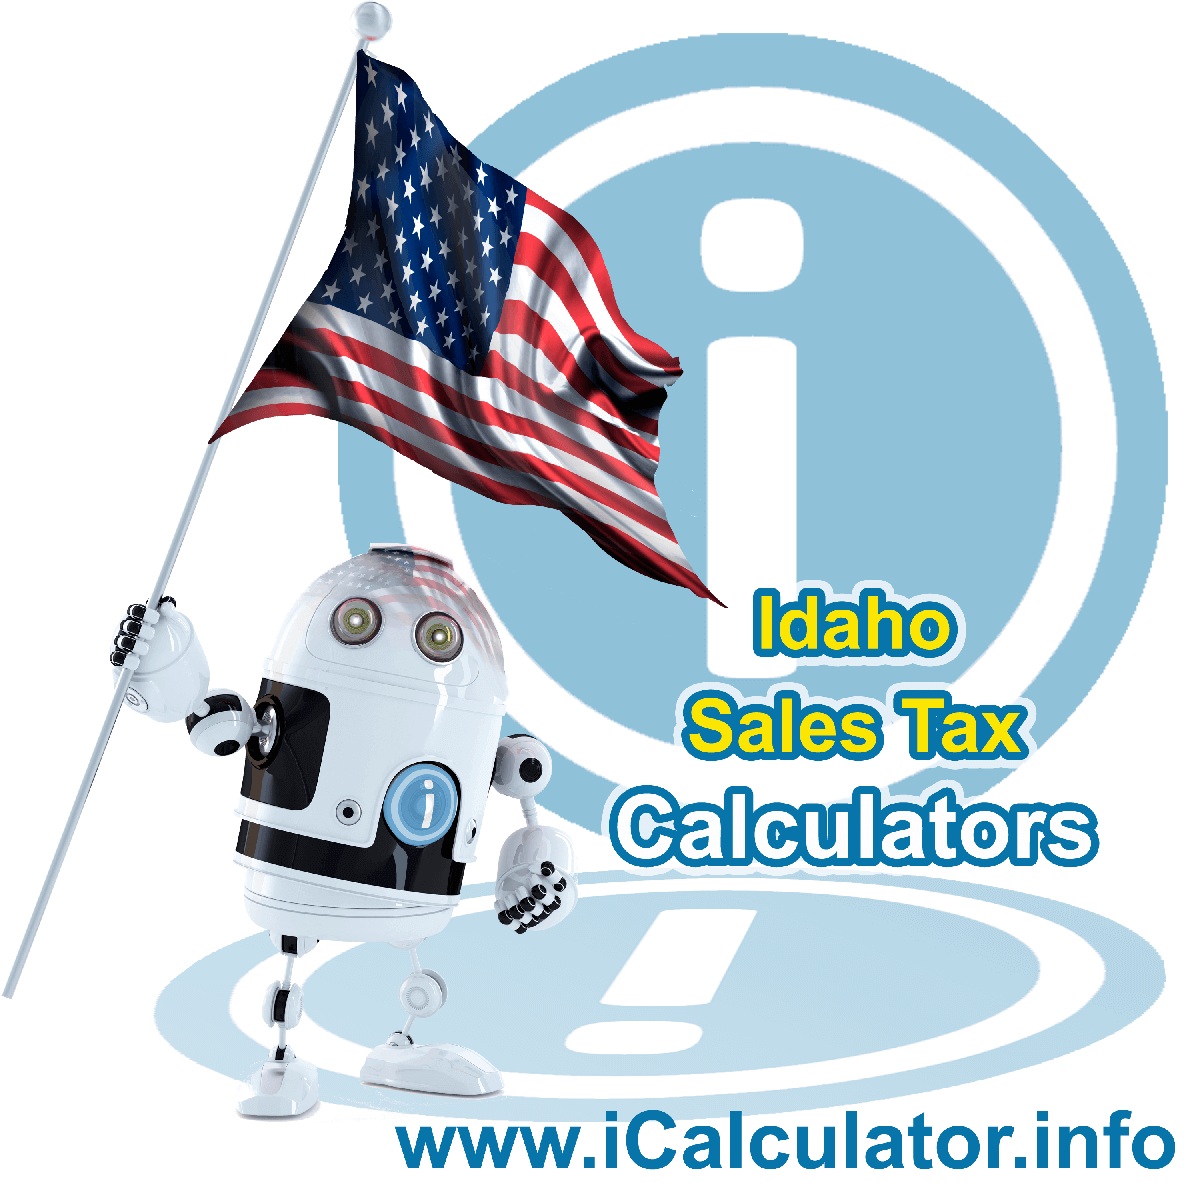 Rigby Sales Rates: This image illustrates a calculator robot calculating Rigby sales tax manually using the Rigby Sales Tax Formula. You can use this information to calculate Rigby Sales Tax manually or use the Rigby Sales Tax Calculator to calculate sales tax online.